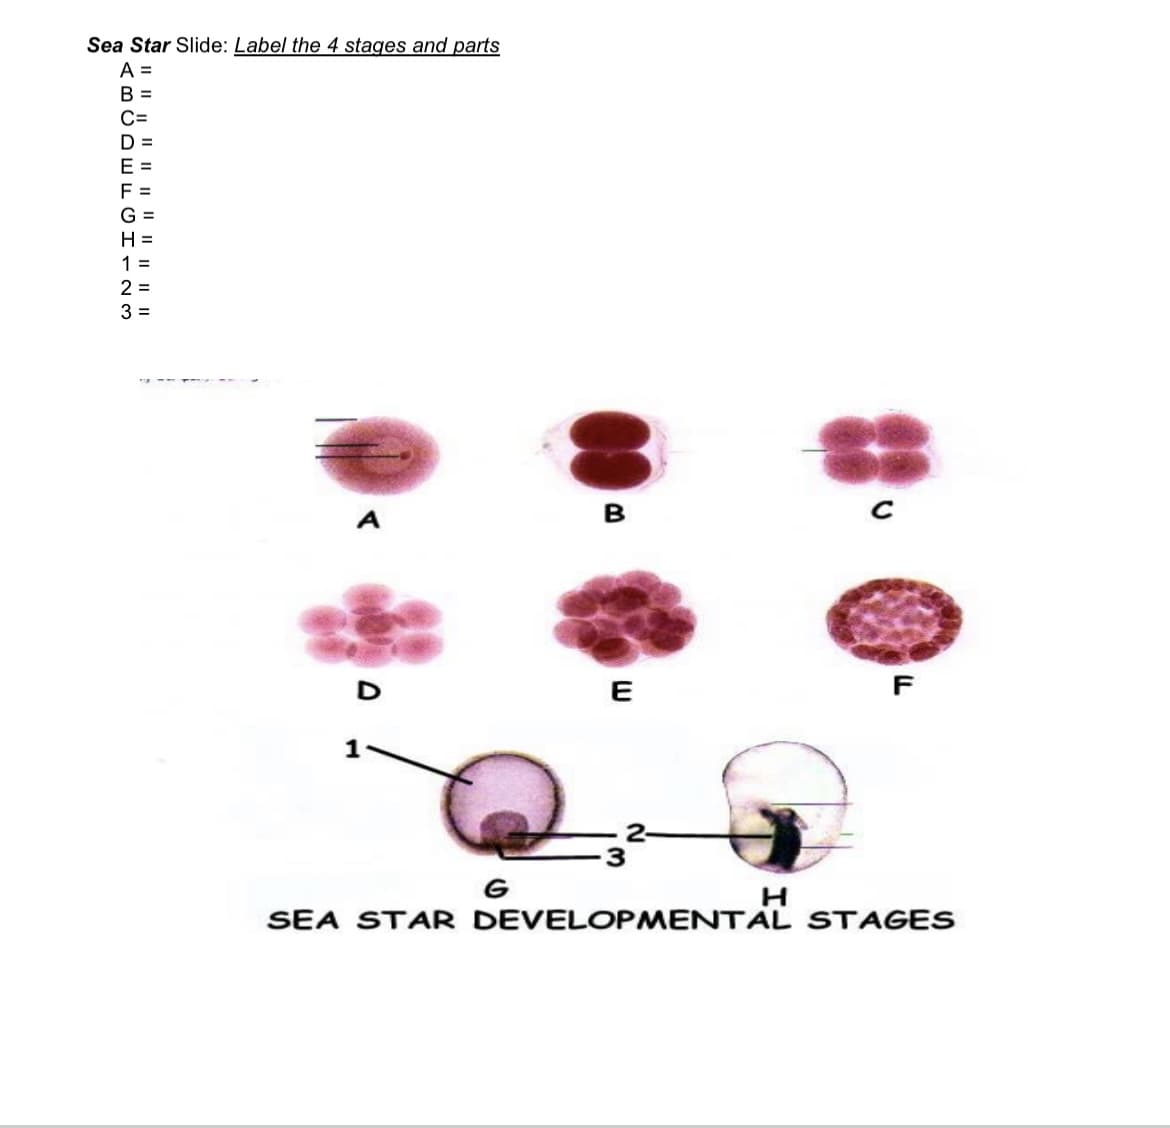 Sea Star Slide: Label the 4 stages and parts
A =
B =
C=
D =
E =
F
G =
H =
1 =
2 =
3 =
A
в
D
E
F
2-
G
SEA STAR DEVELOPMENTAL STAGES
